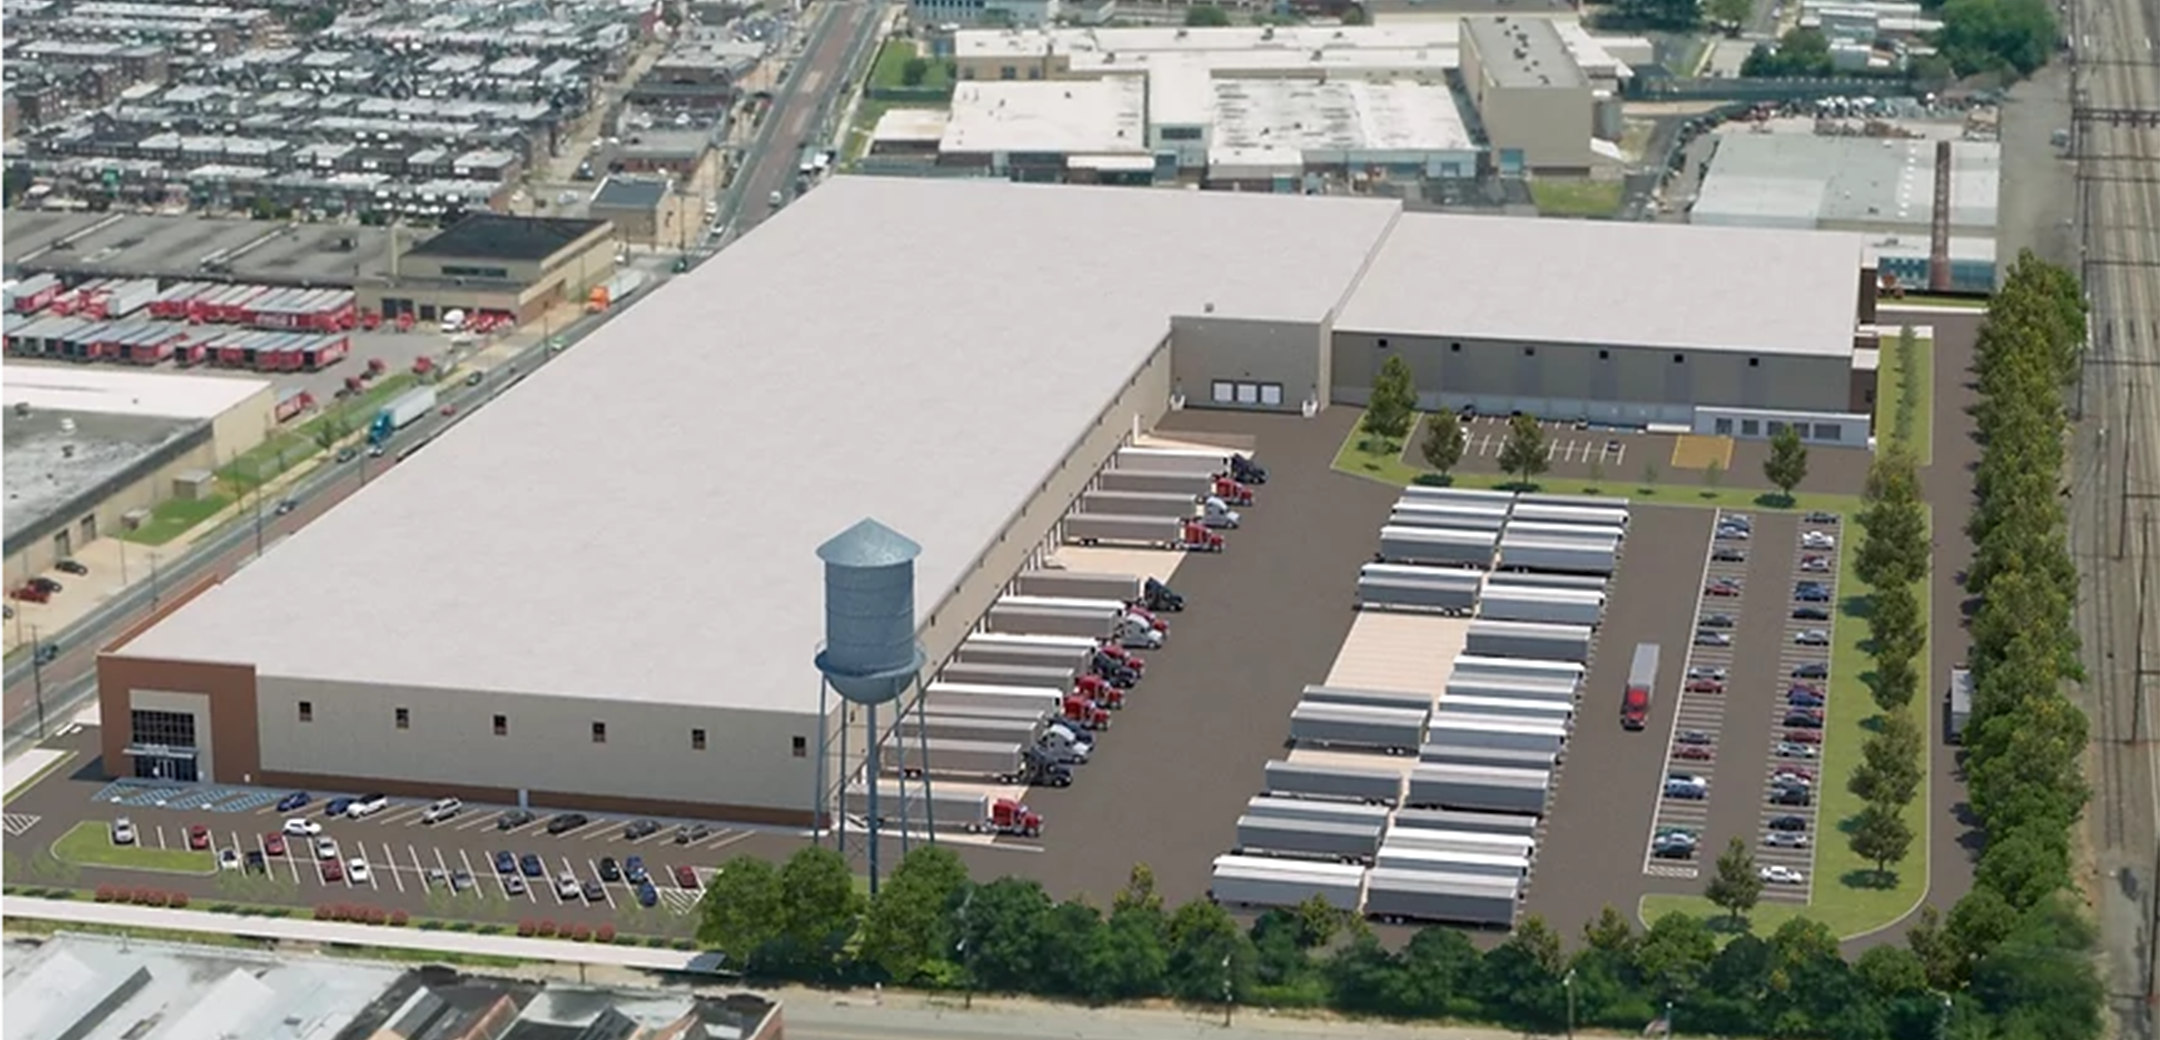 An aerial render of the 956 East Earie warehouse, showcasing the large layout, parking lot filled with trucks placed into the environment.